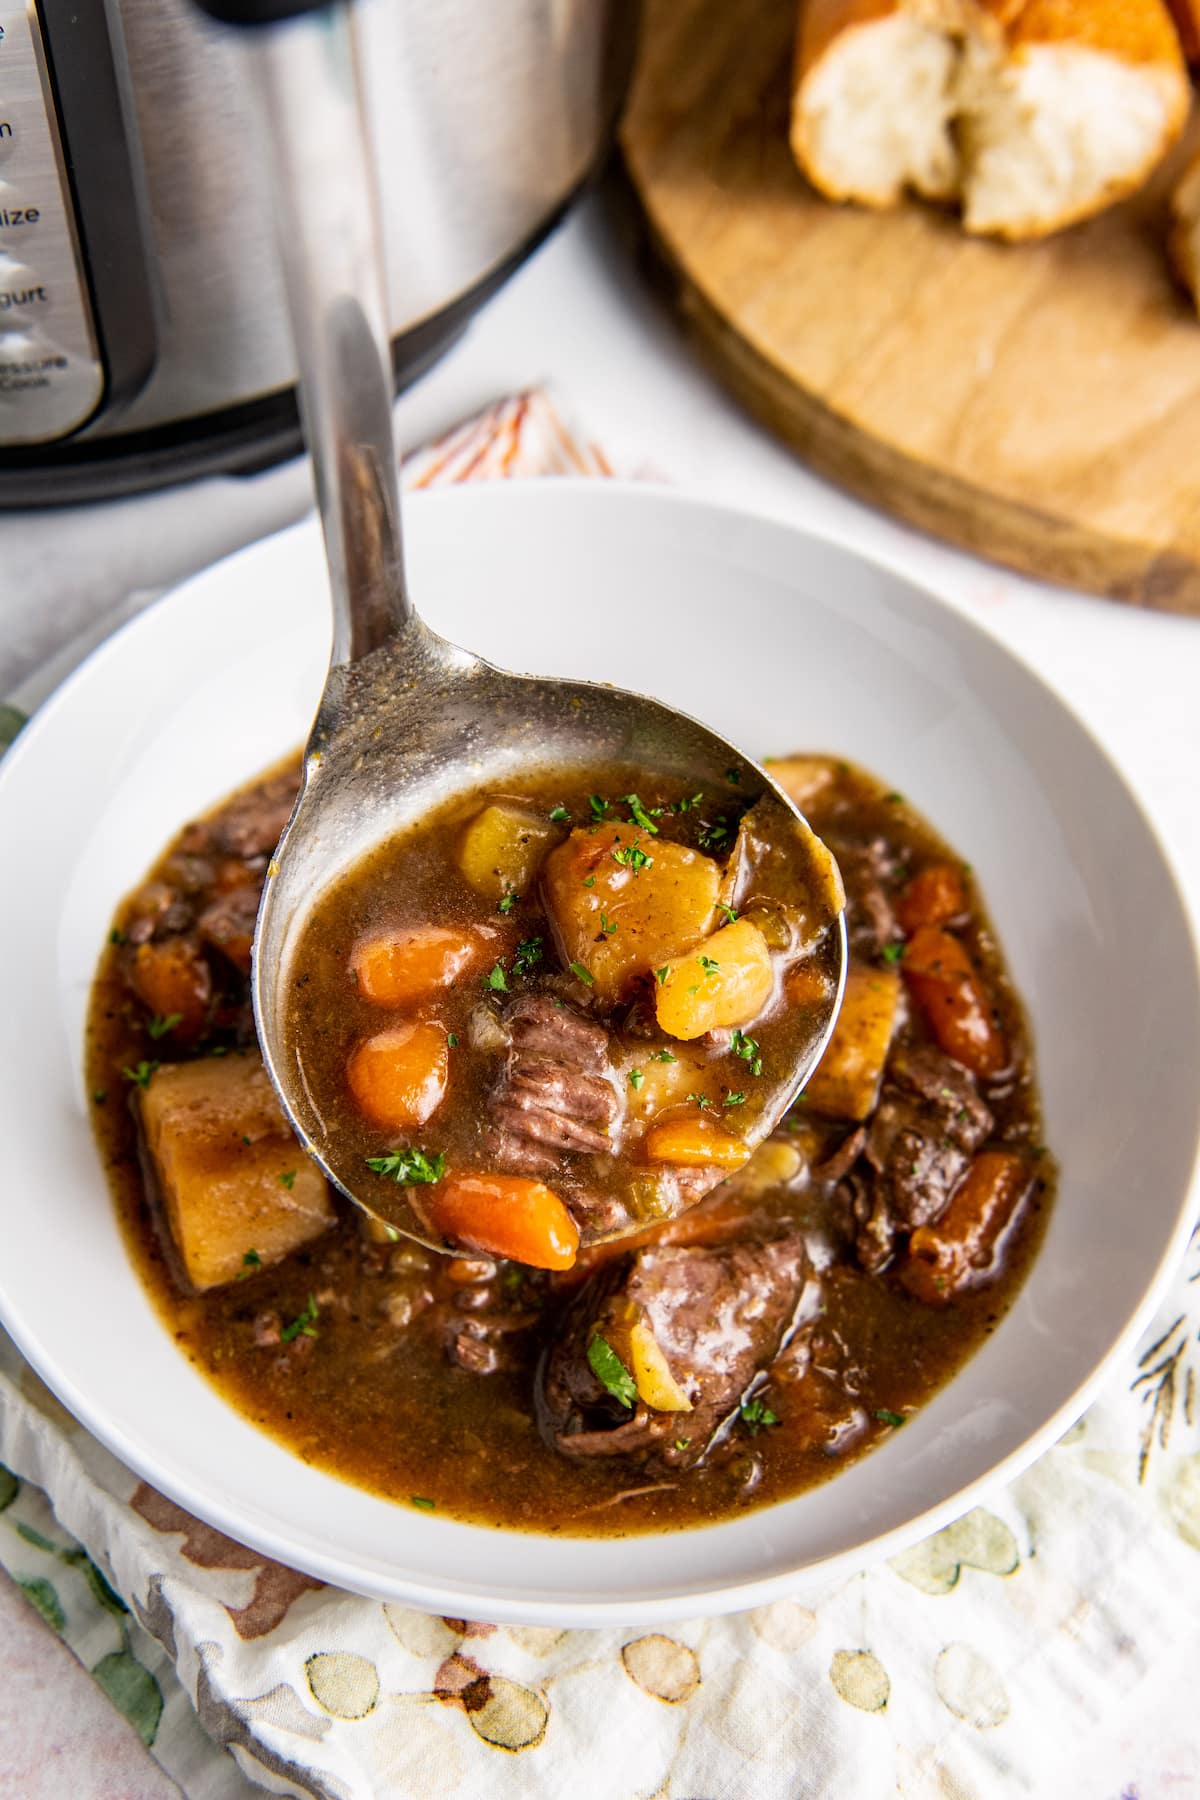 A ladle shows a close-up of beef stew with carrot and potatoes with